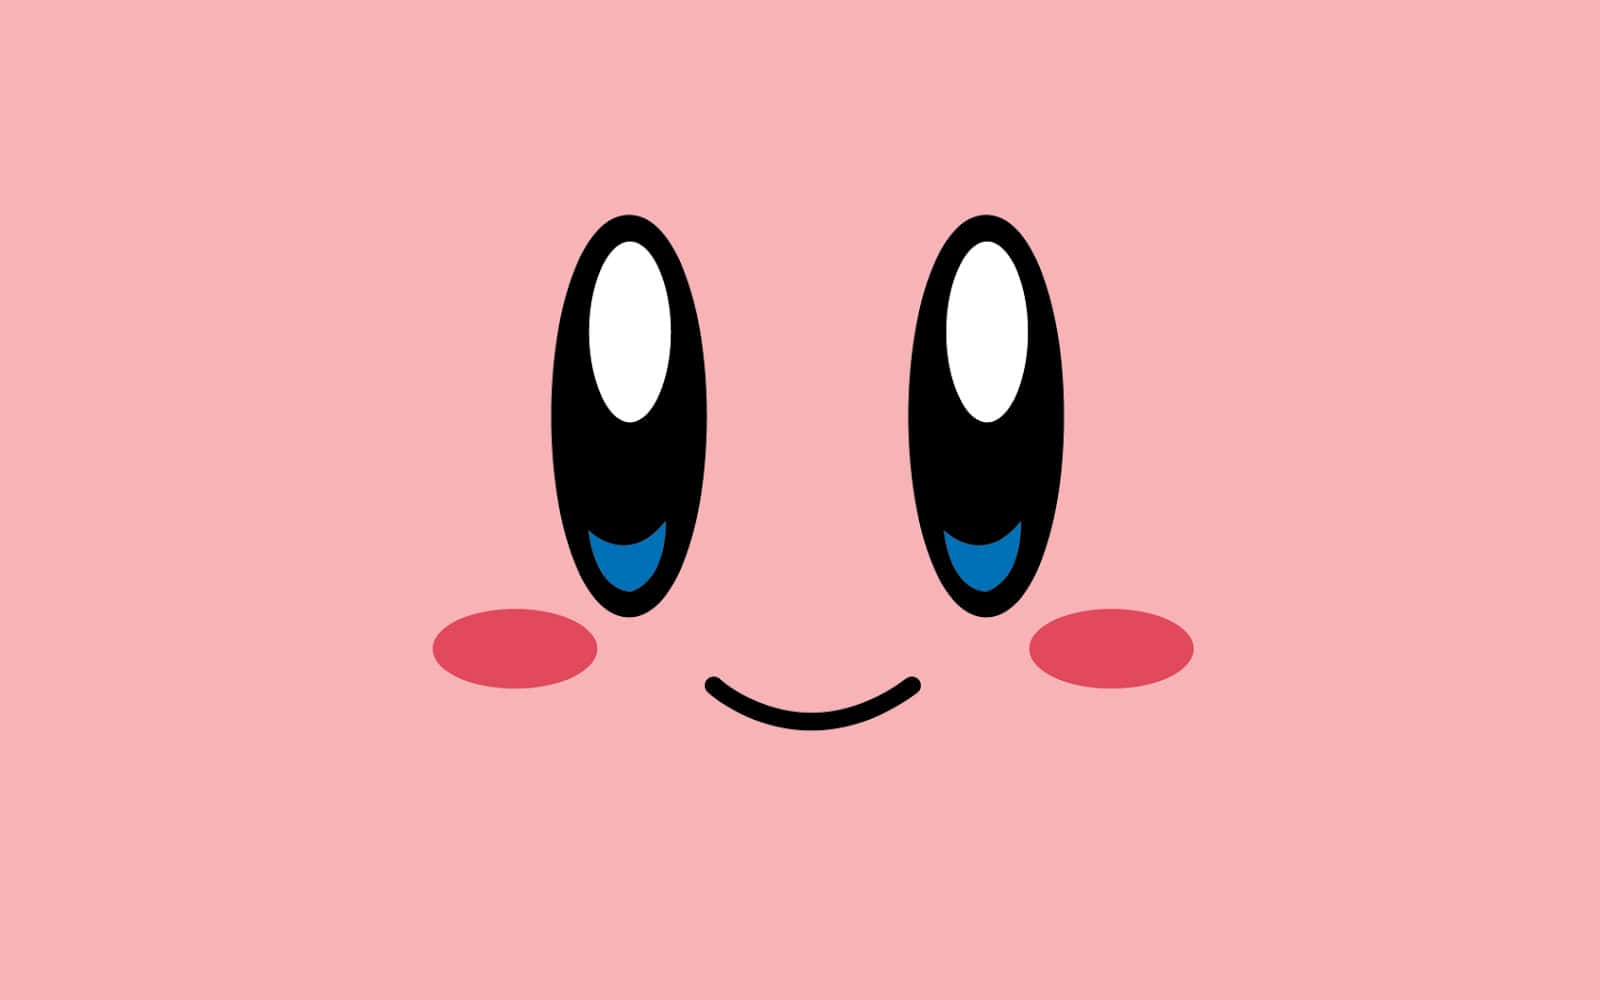 "Kirby the pink puffball smiles at the camera!"